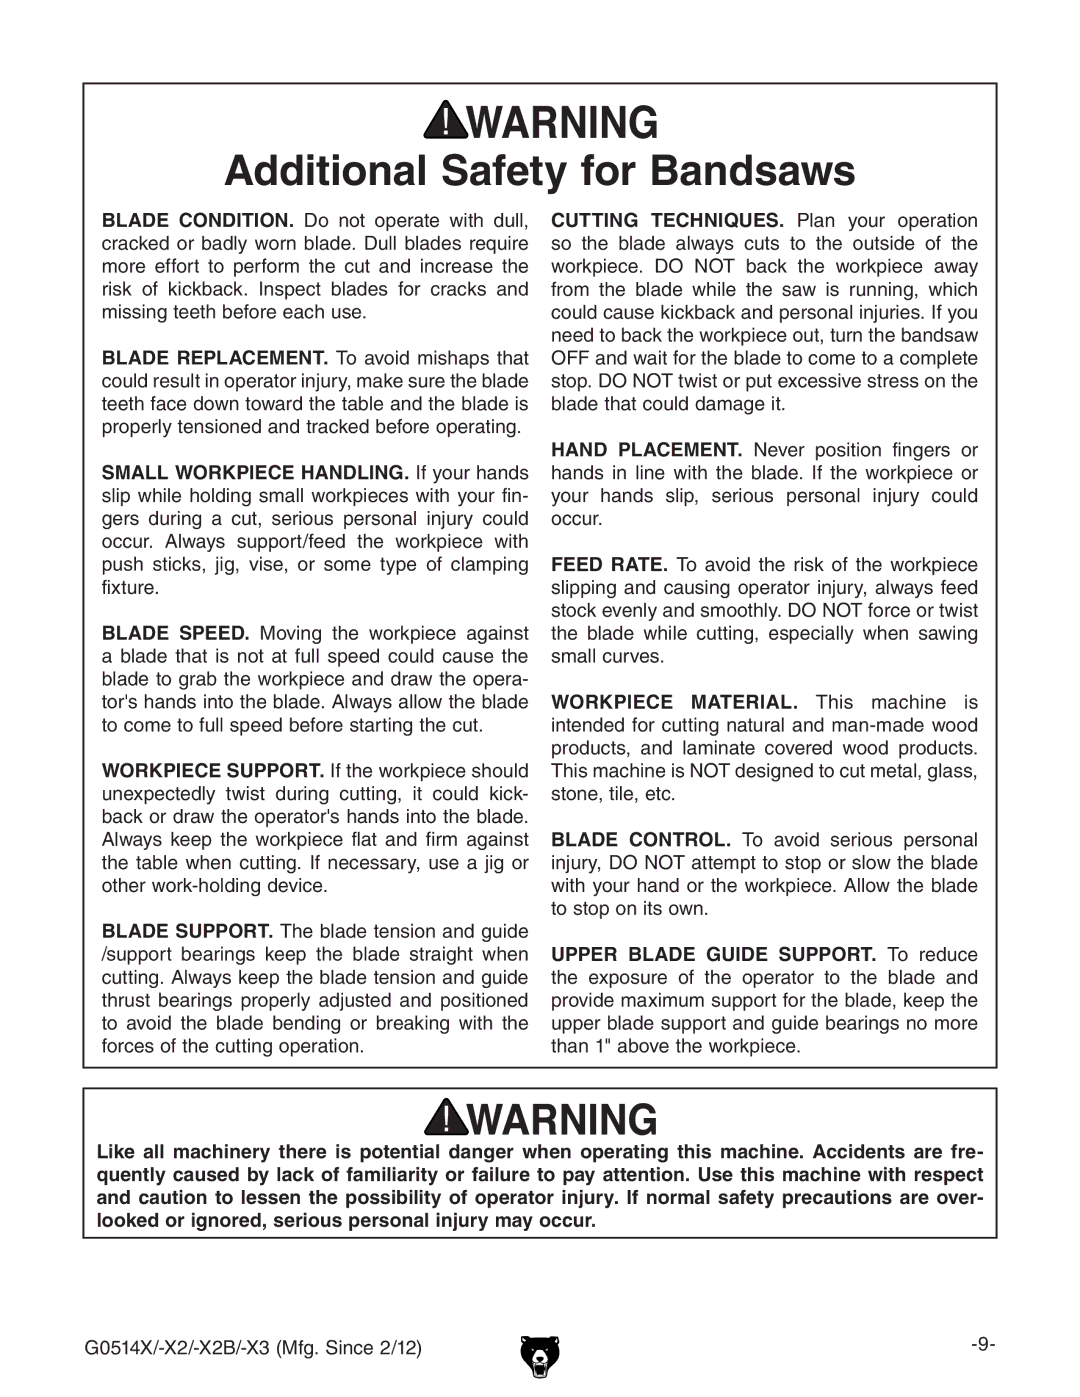 Grizzly G0514X owner manual Additional Safety for Bandsaws 